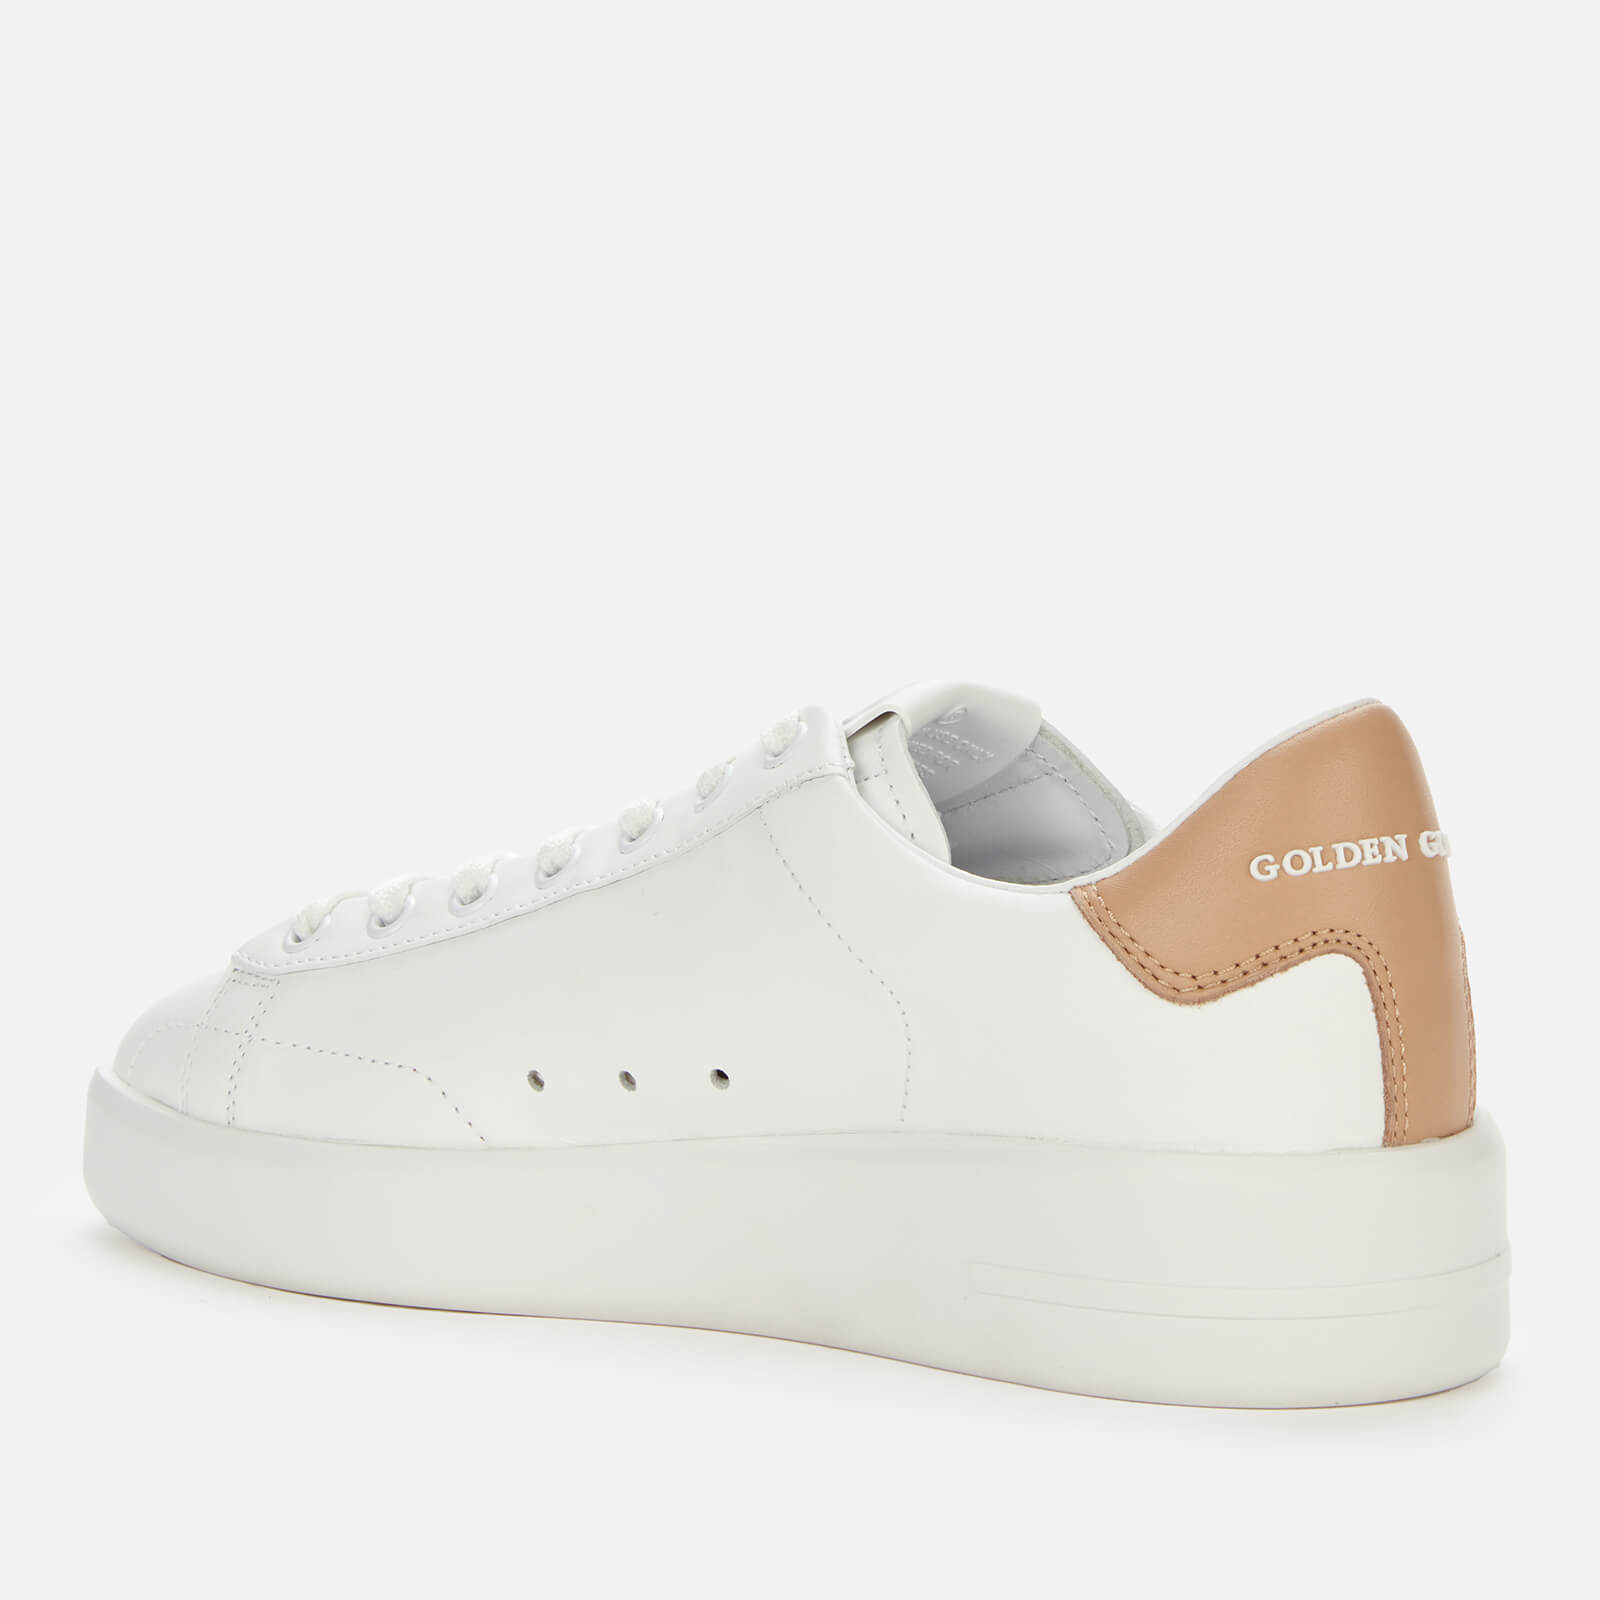 Golden Goose Deluxe Brand Women's Purestar Leather Chunky Trainers - White/Beige - UK 6